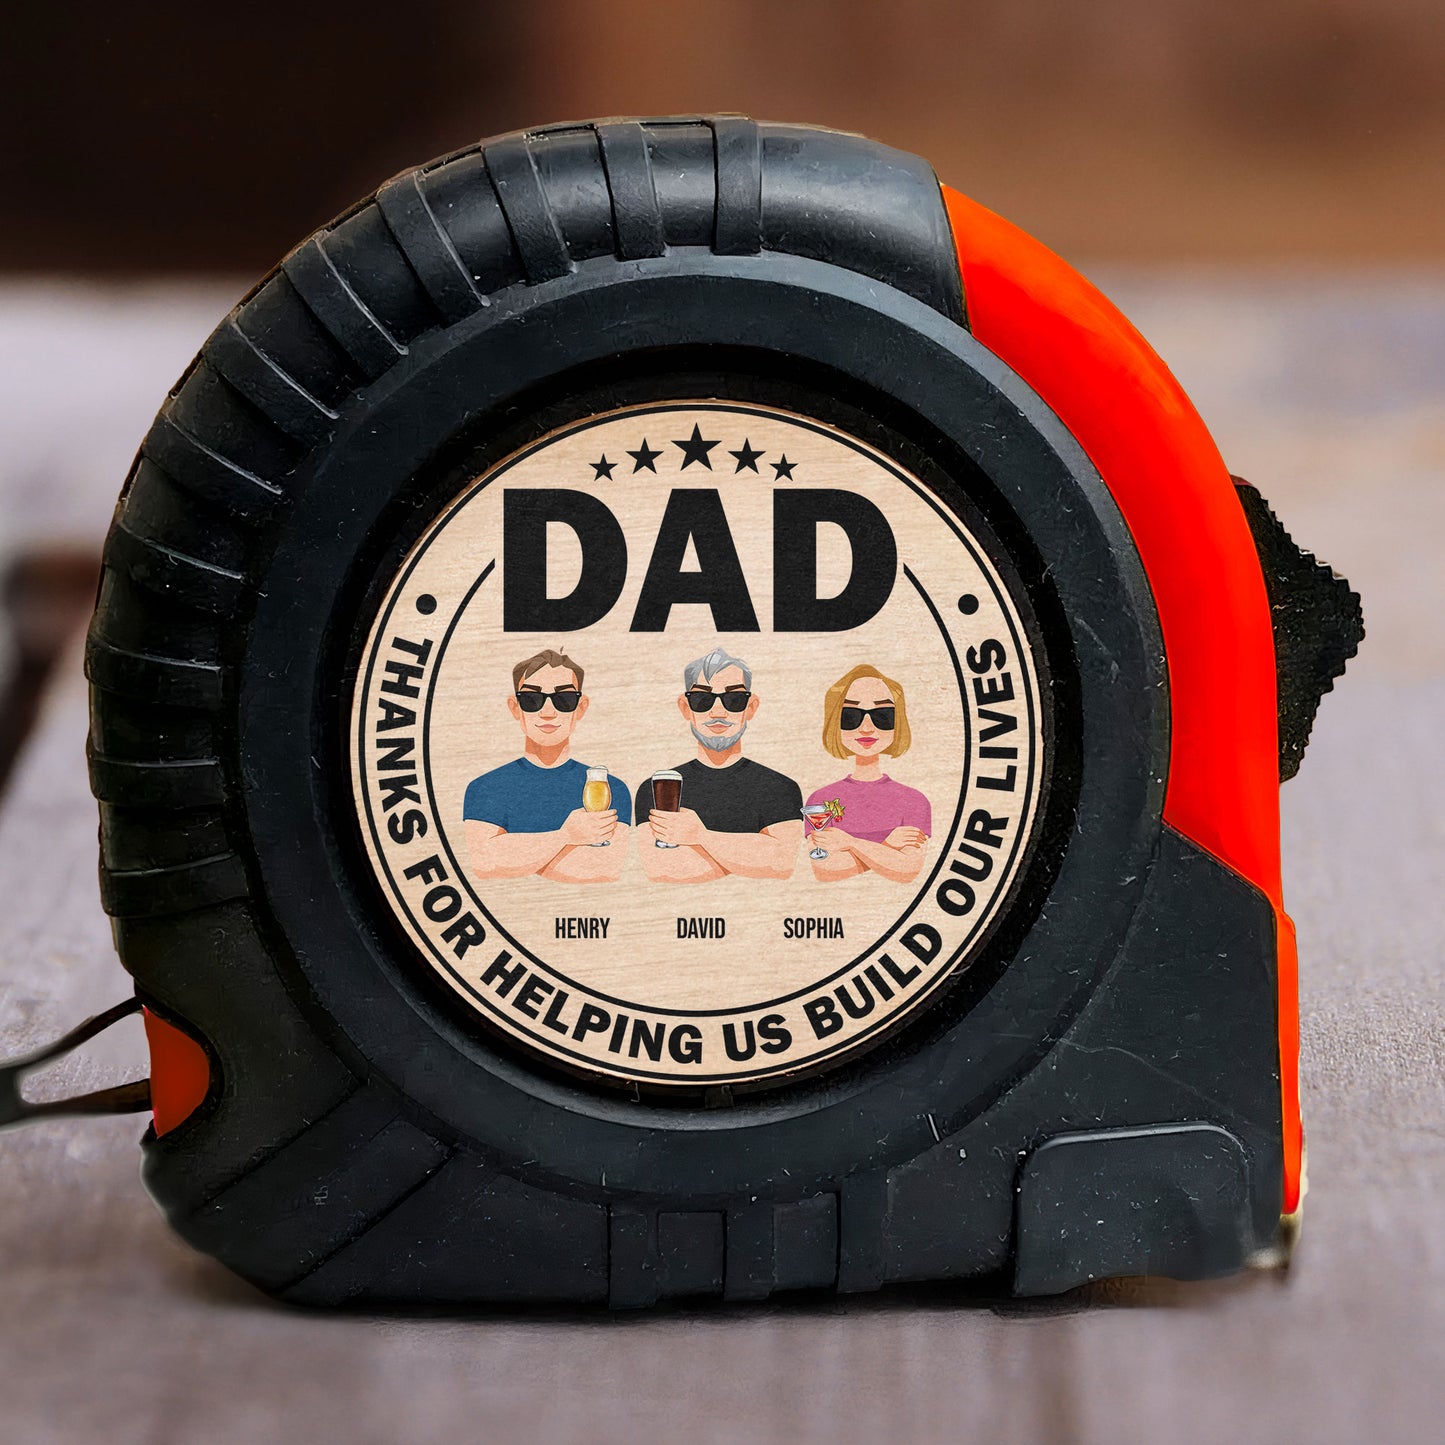 Dad Thanks For Helping Us Build Our Lives - Personalized Tape Measure